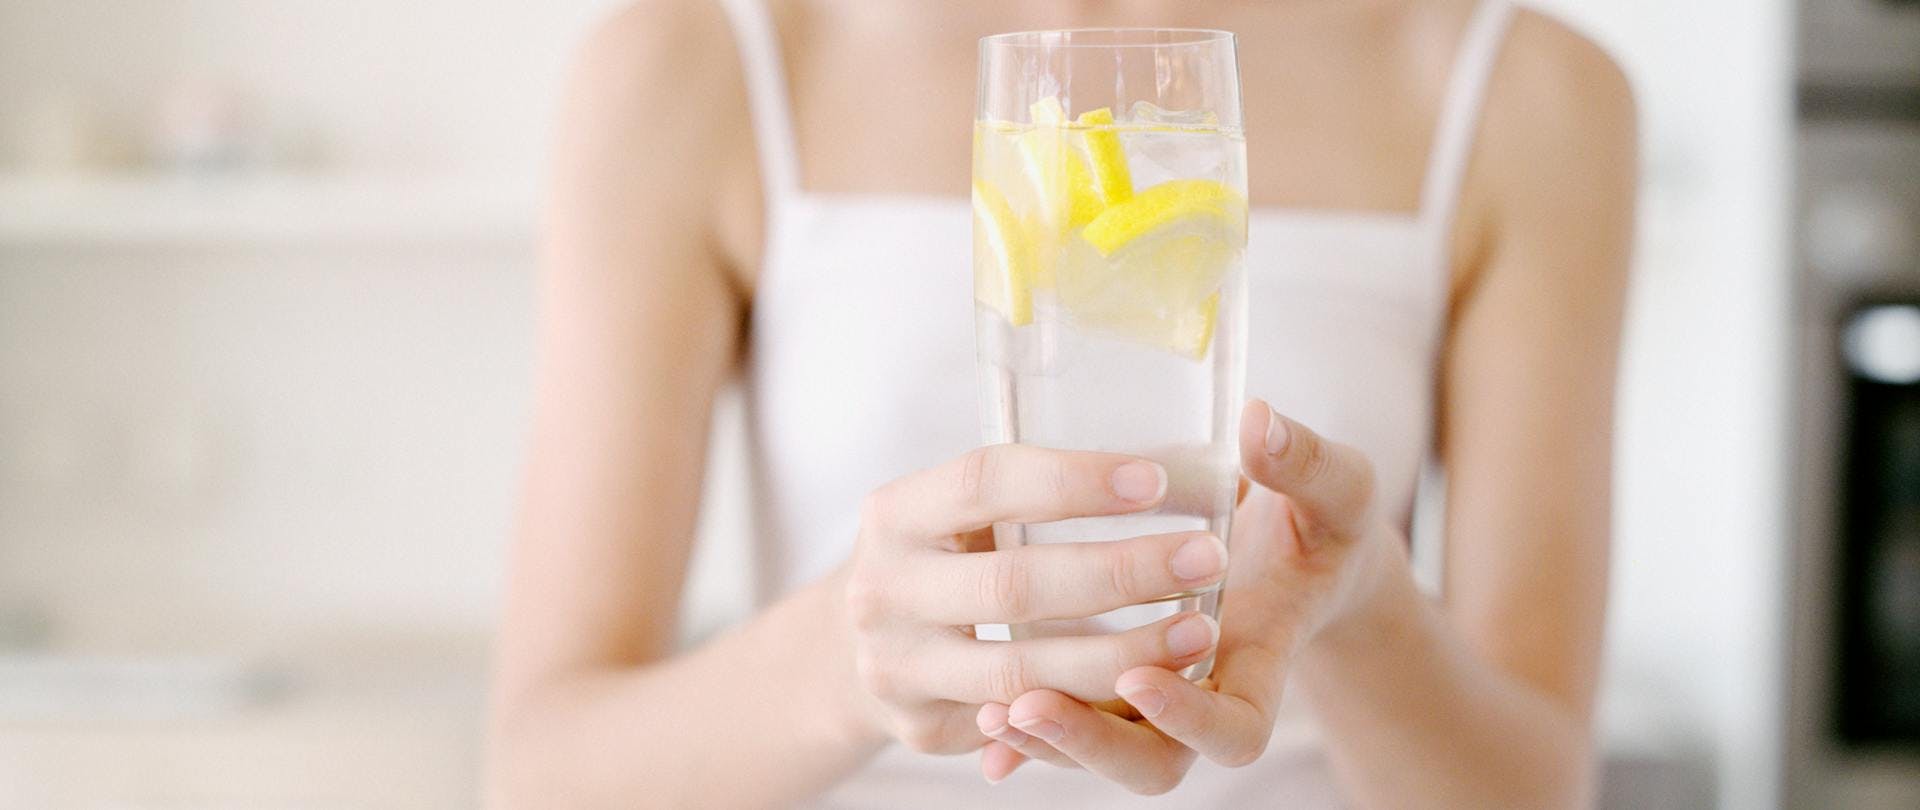 Arsenic Poisoning Health Concerns and Dangers Woman Enjoys a Glass of Water